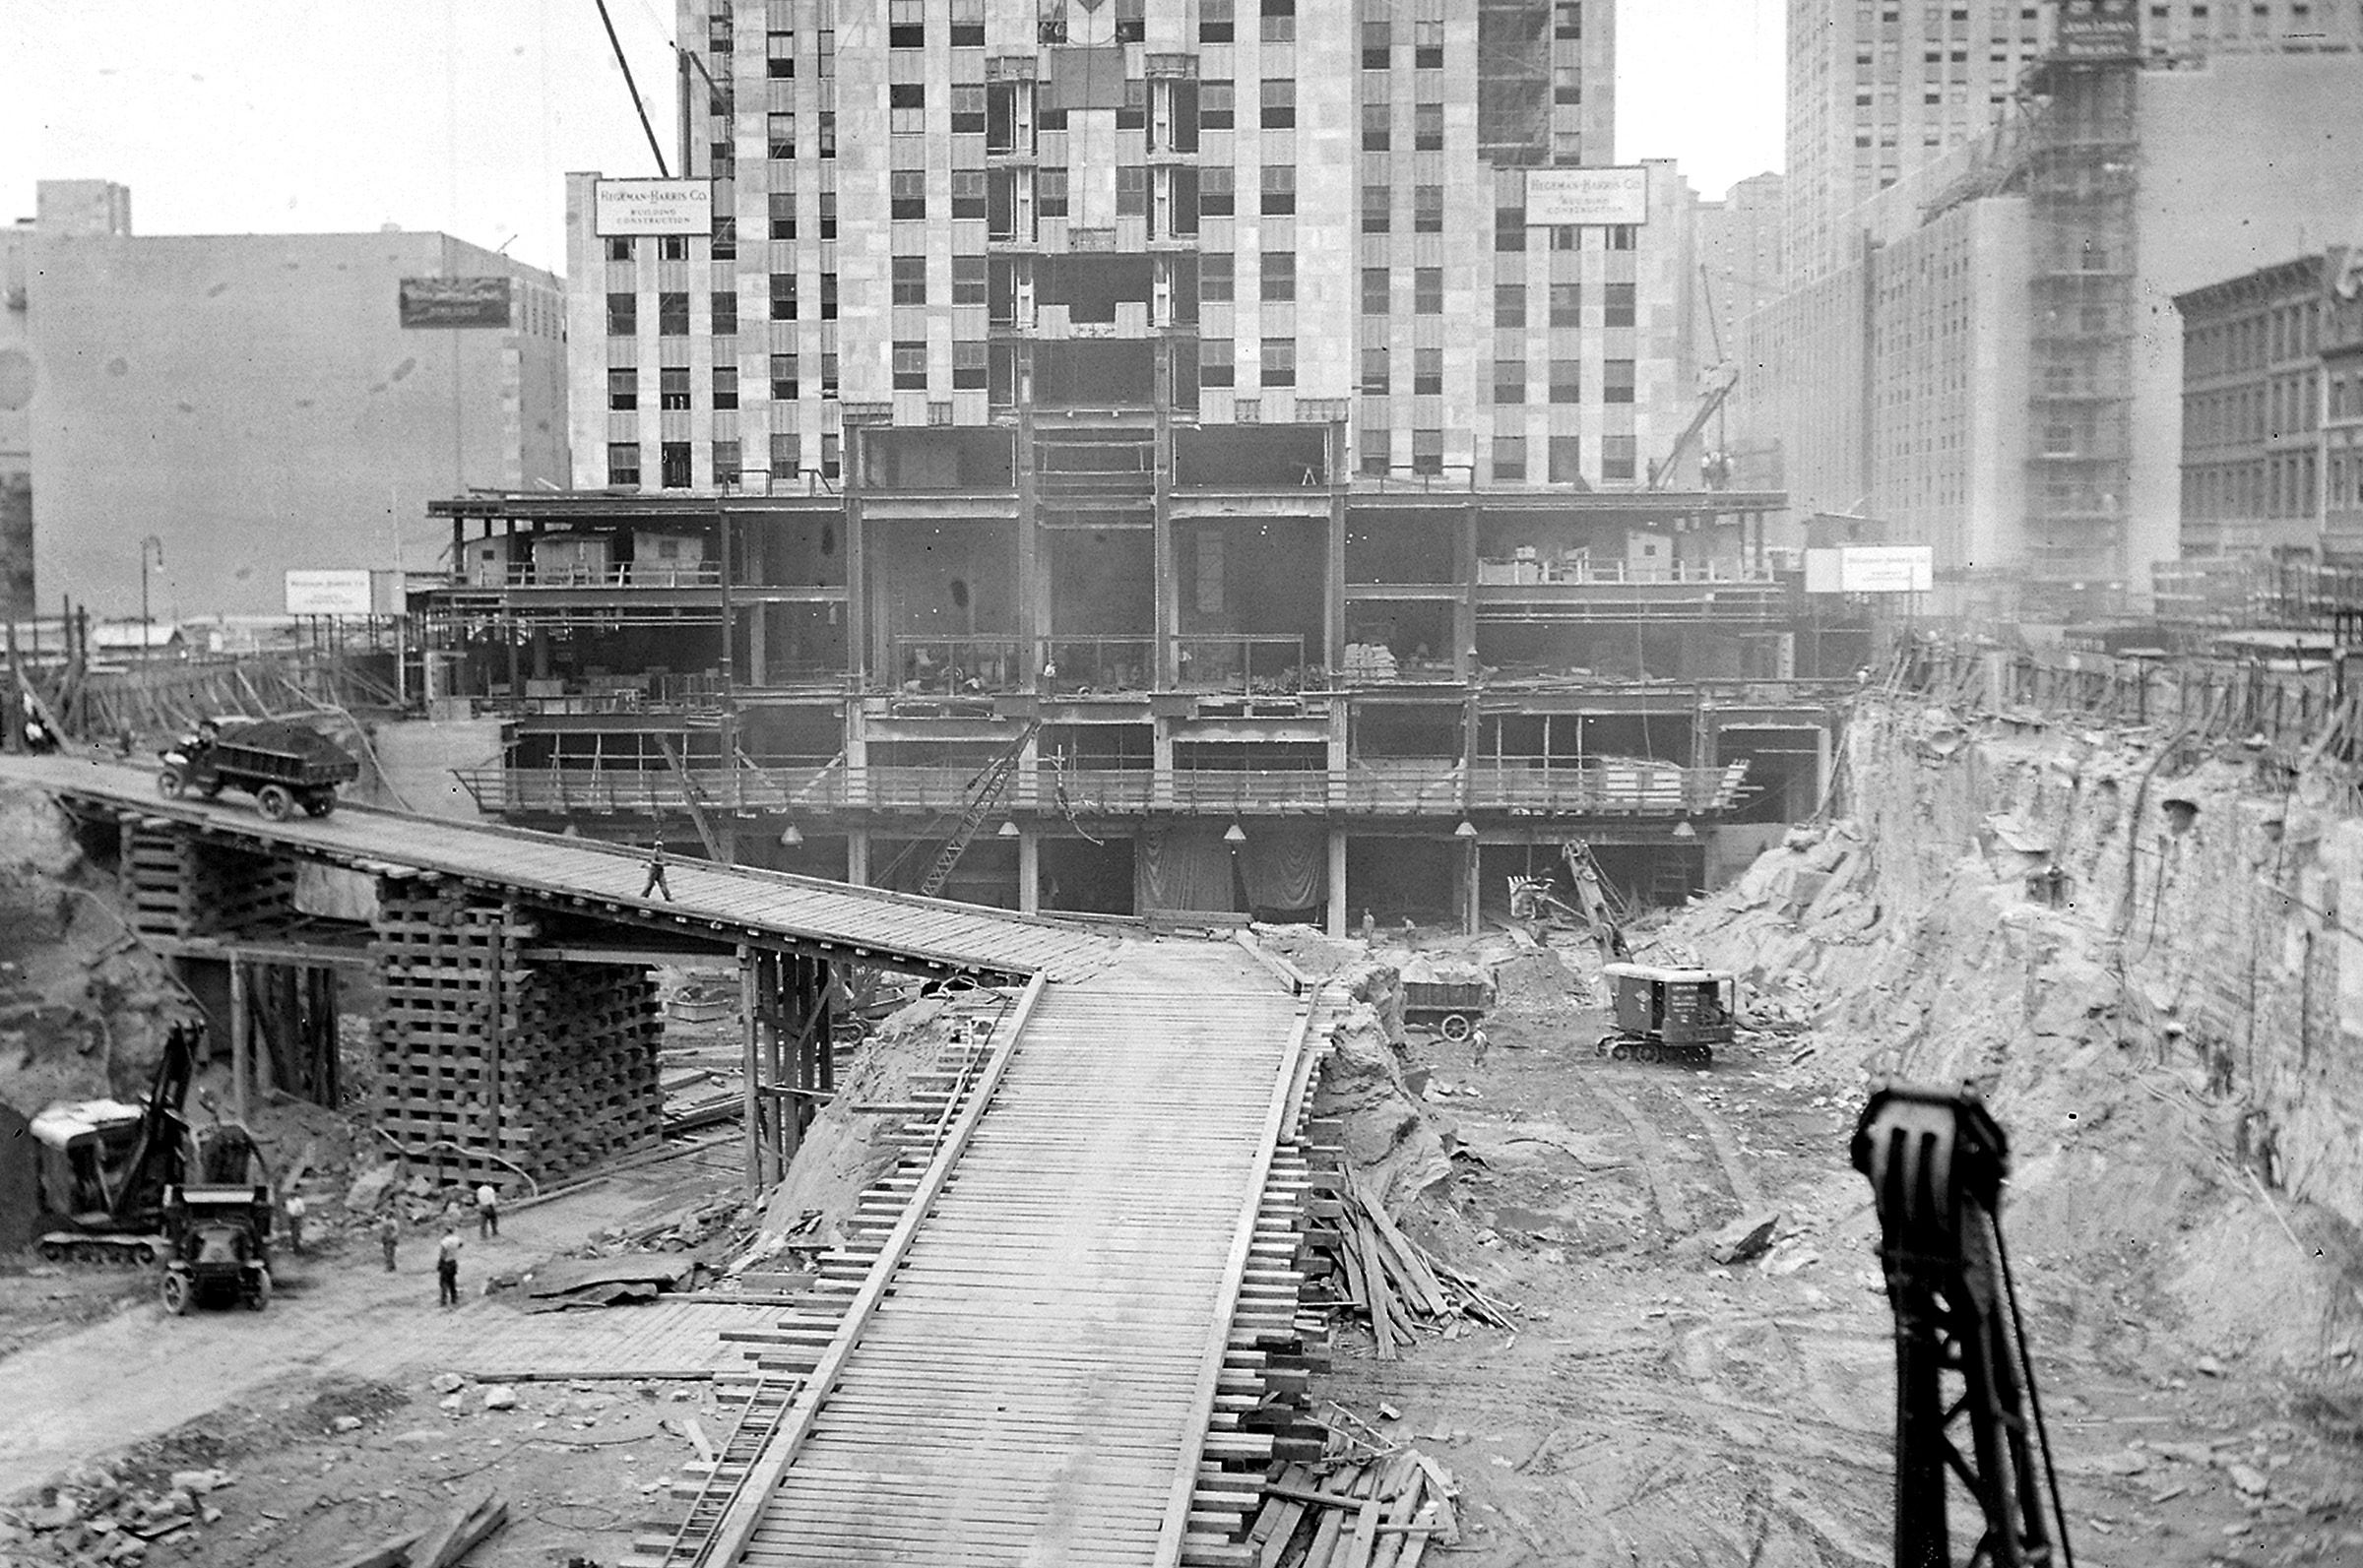 Excavation of site for Rockefeller Center construction on January 26, 1932.